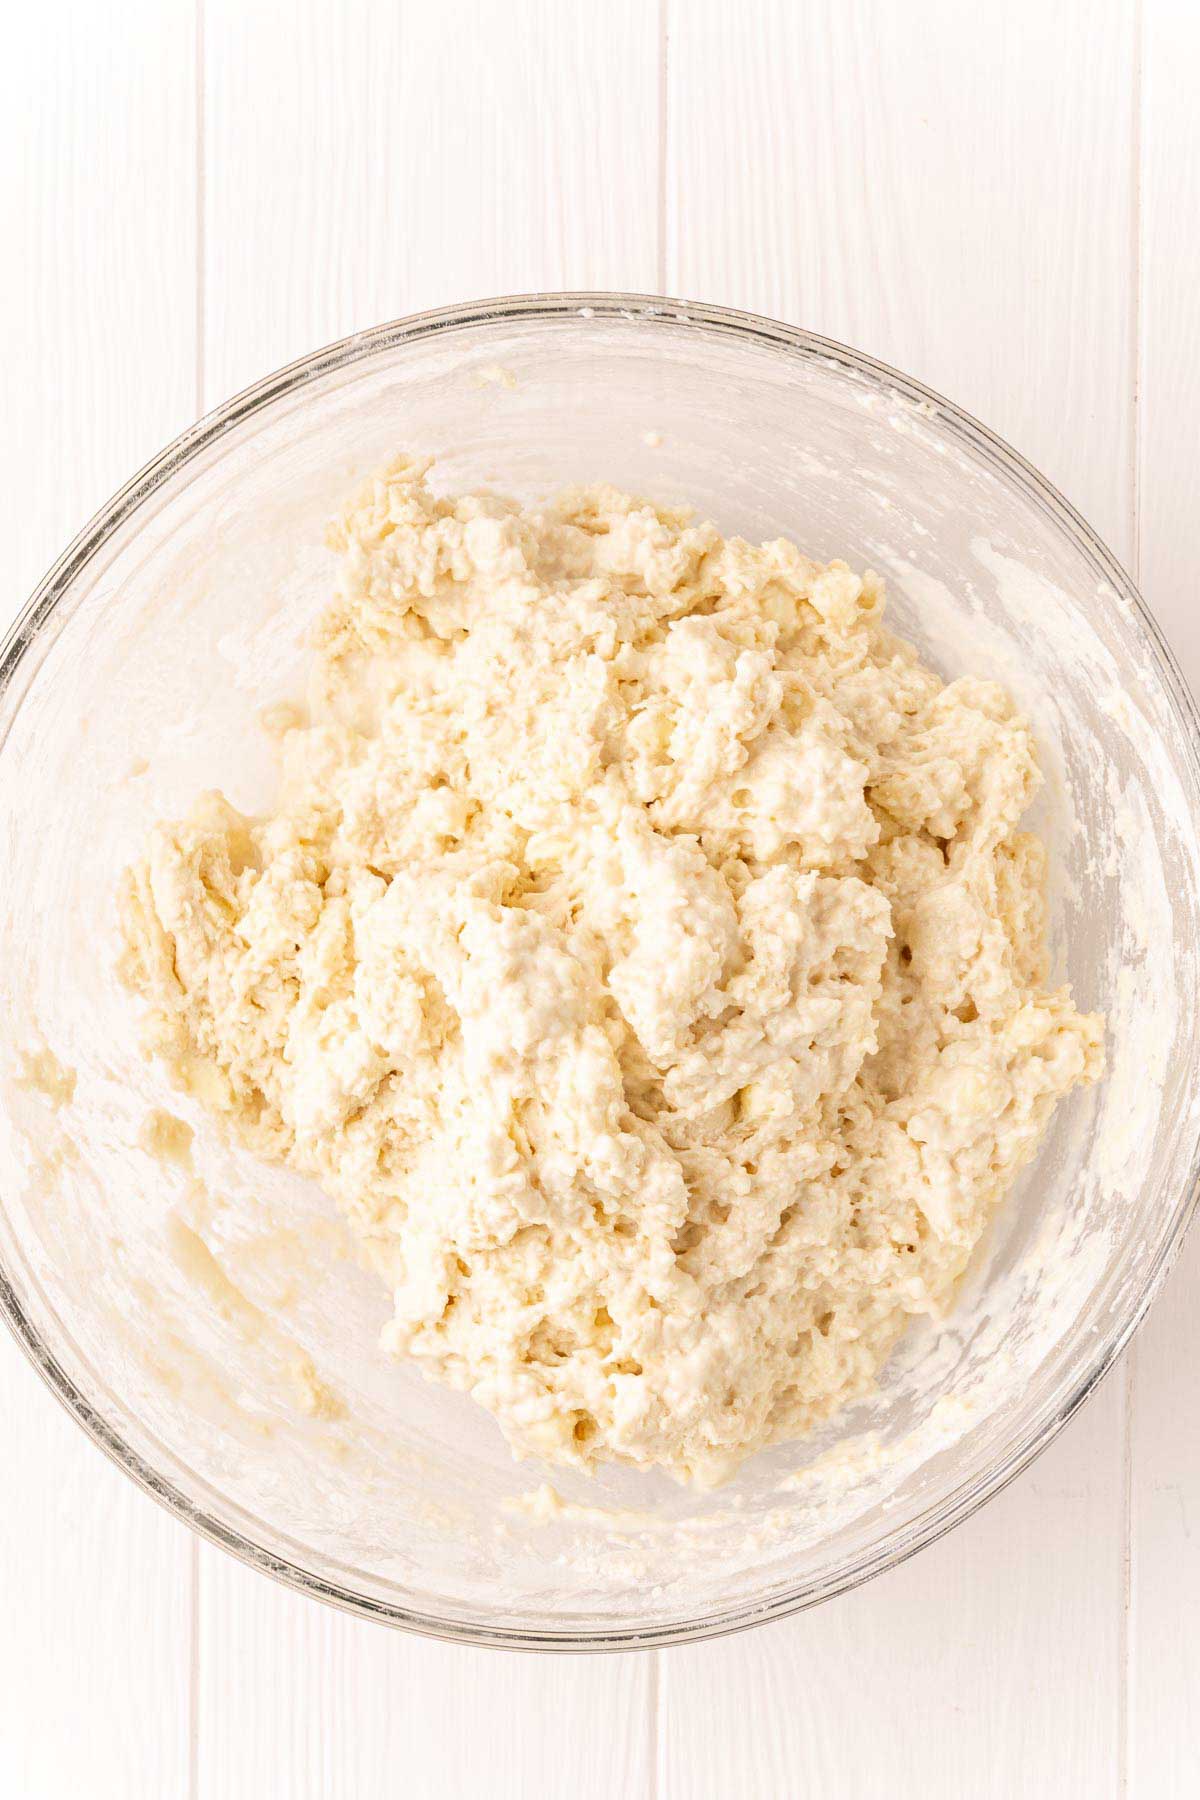 dough for drop biscuits in a glass bowl